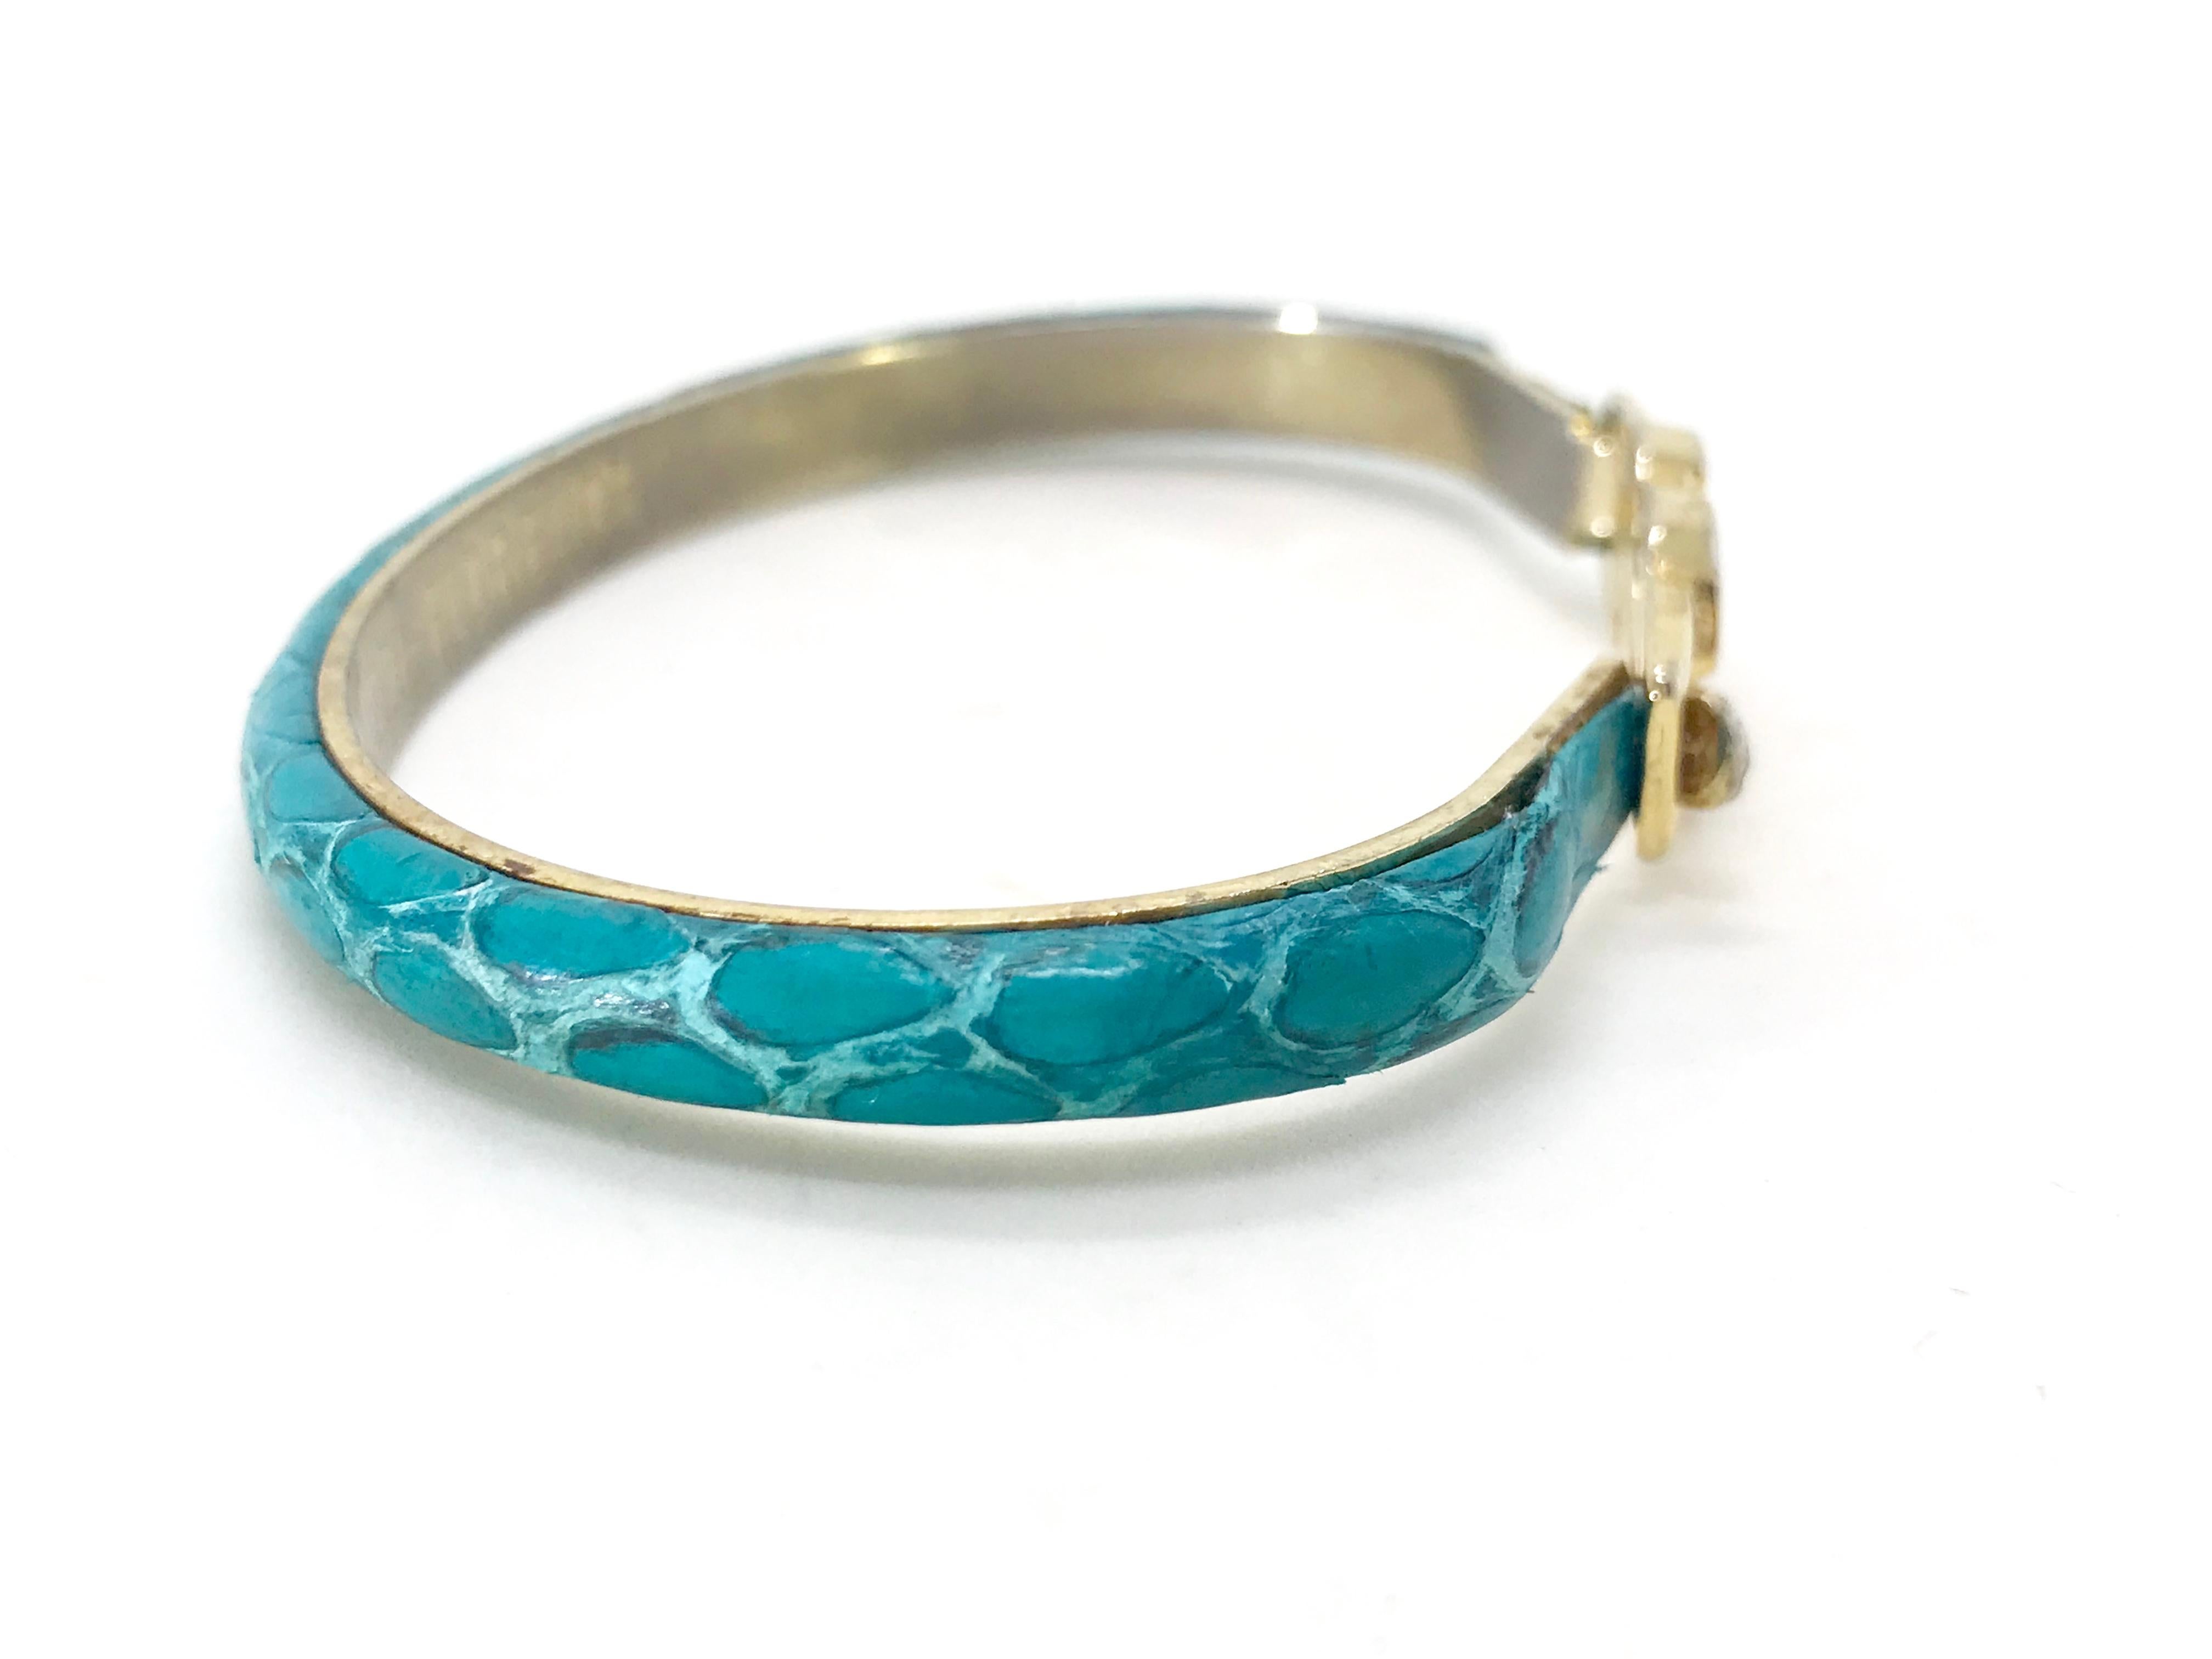 Gucci 1970s Vintage Bracelet Gold Plated and Teal Leather im Zustand „Gut“ in London, GB